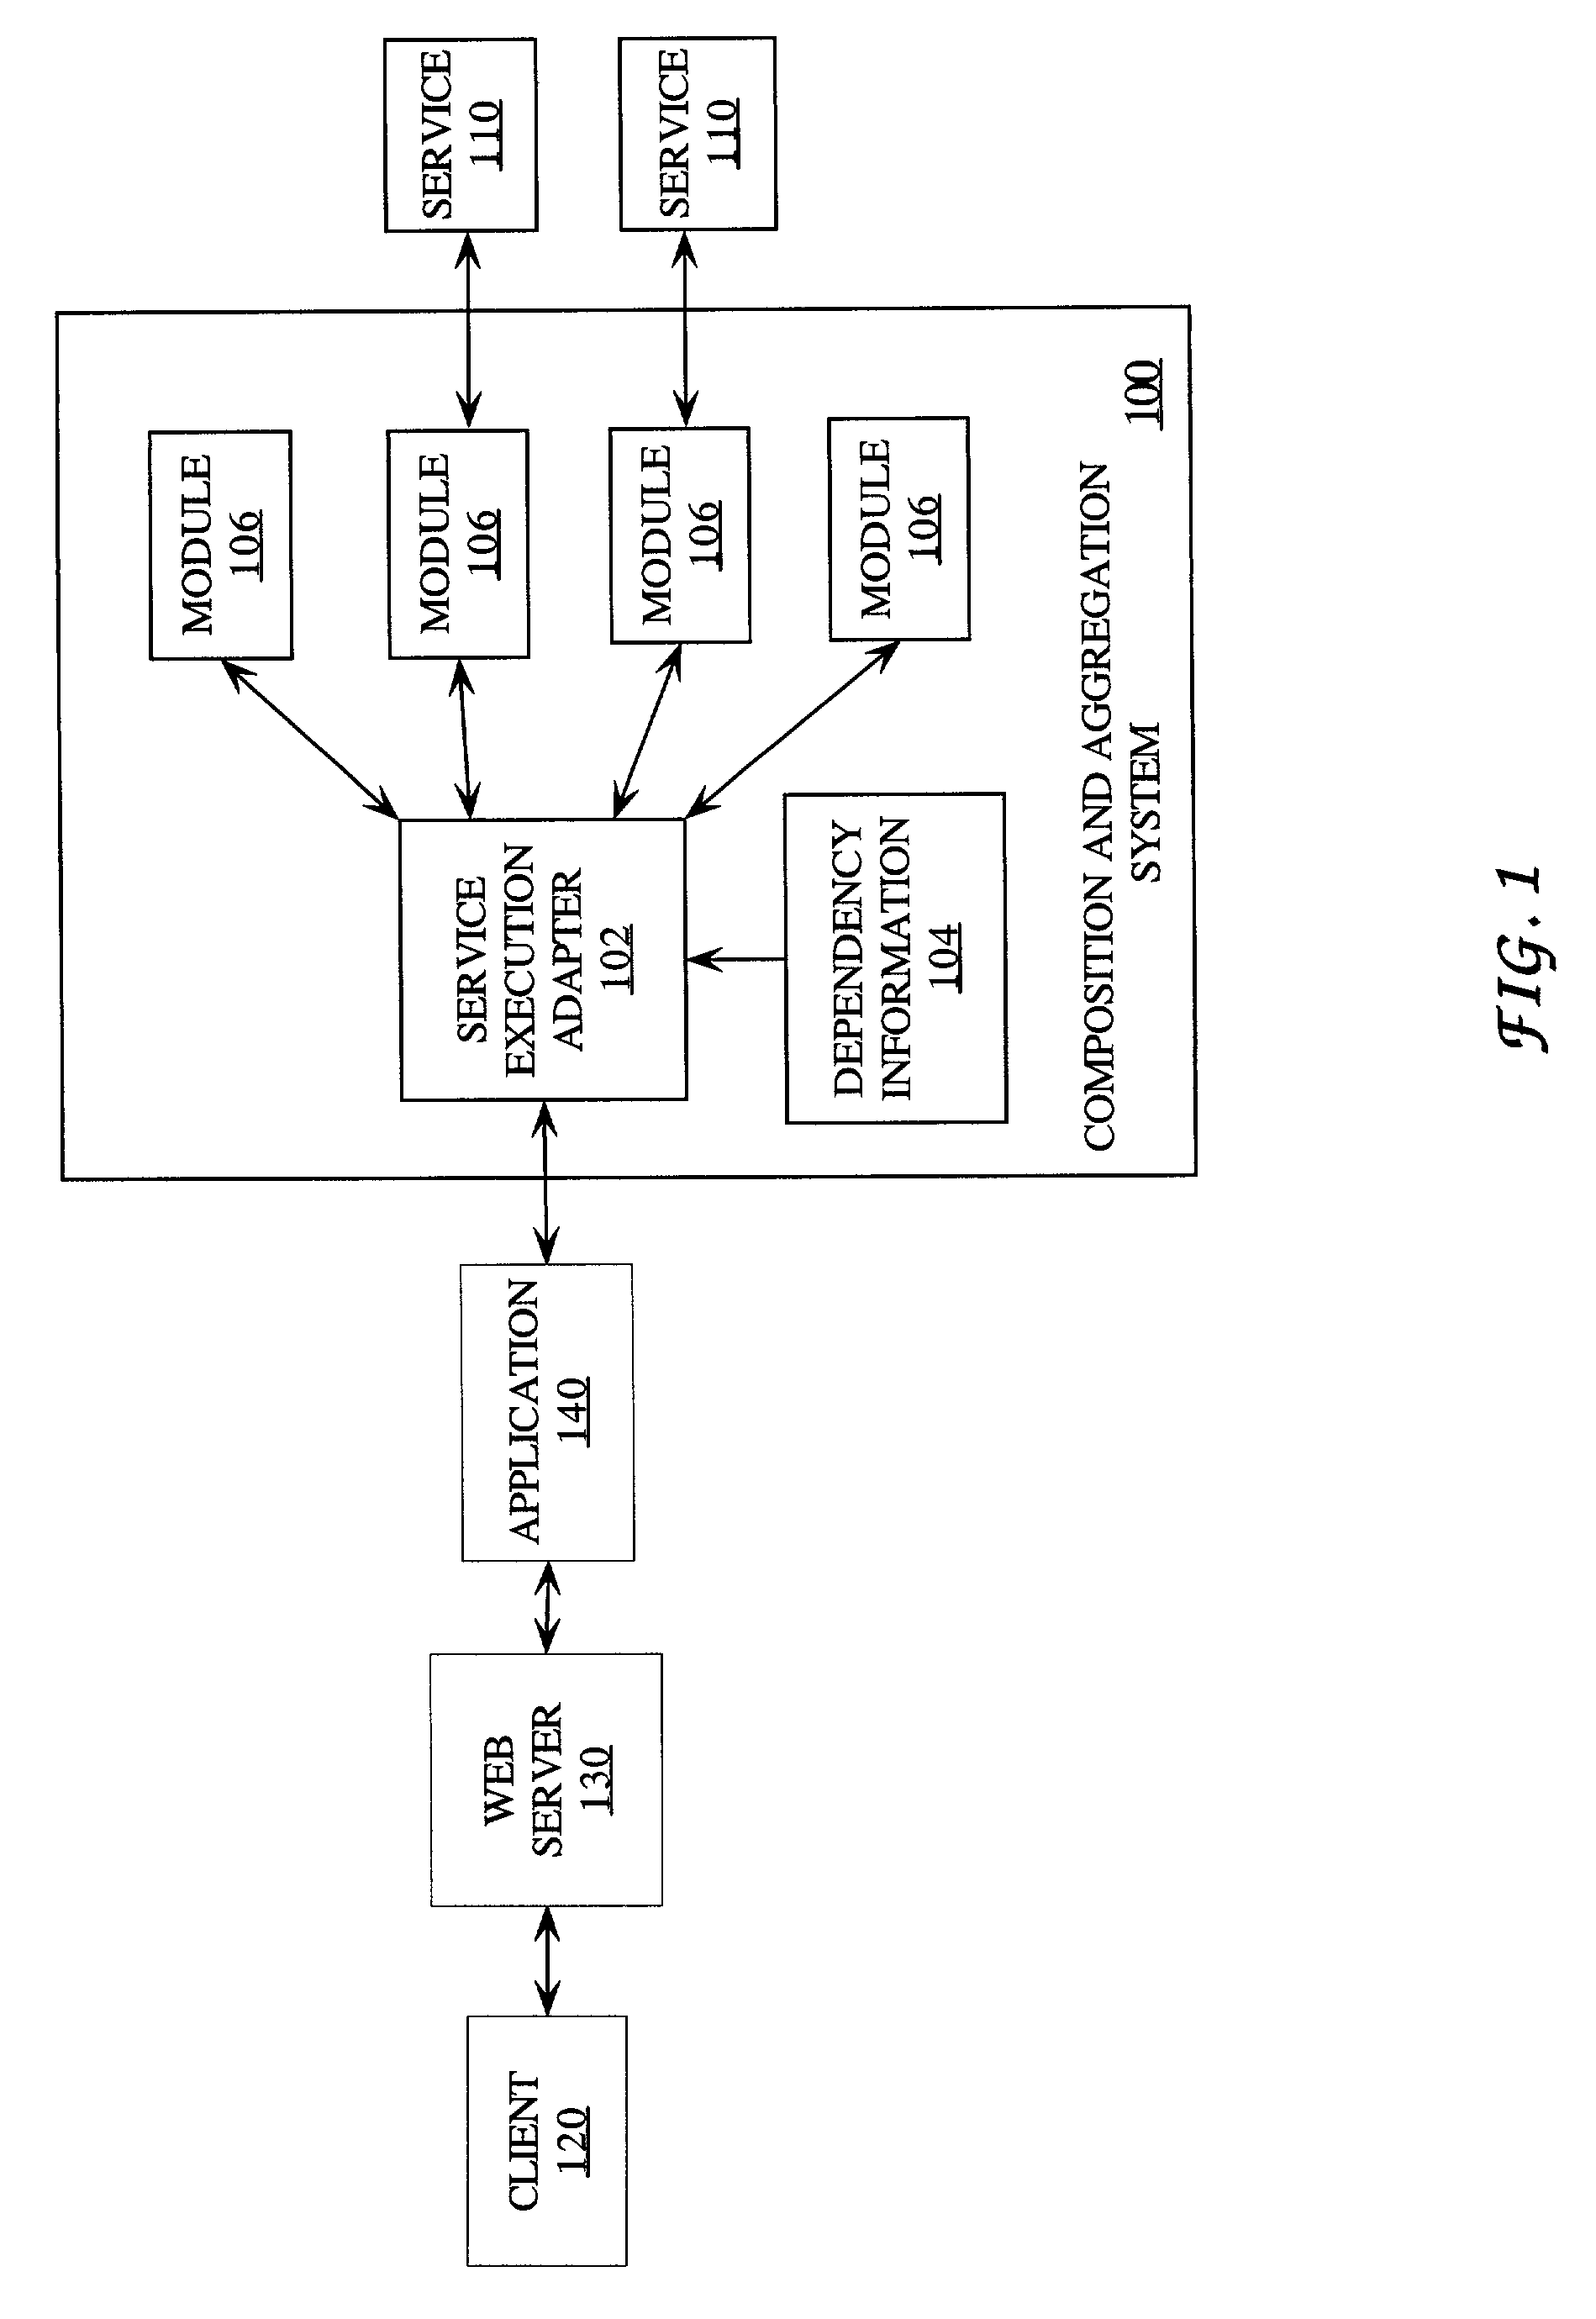 Distributed service aggregation and composition